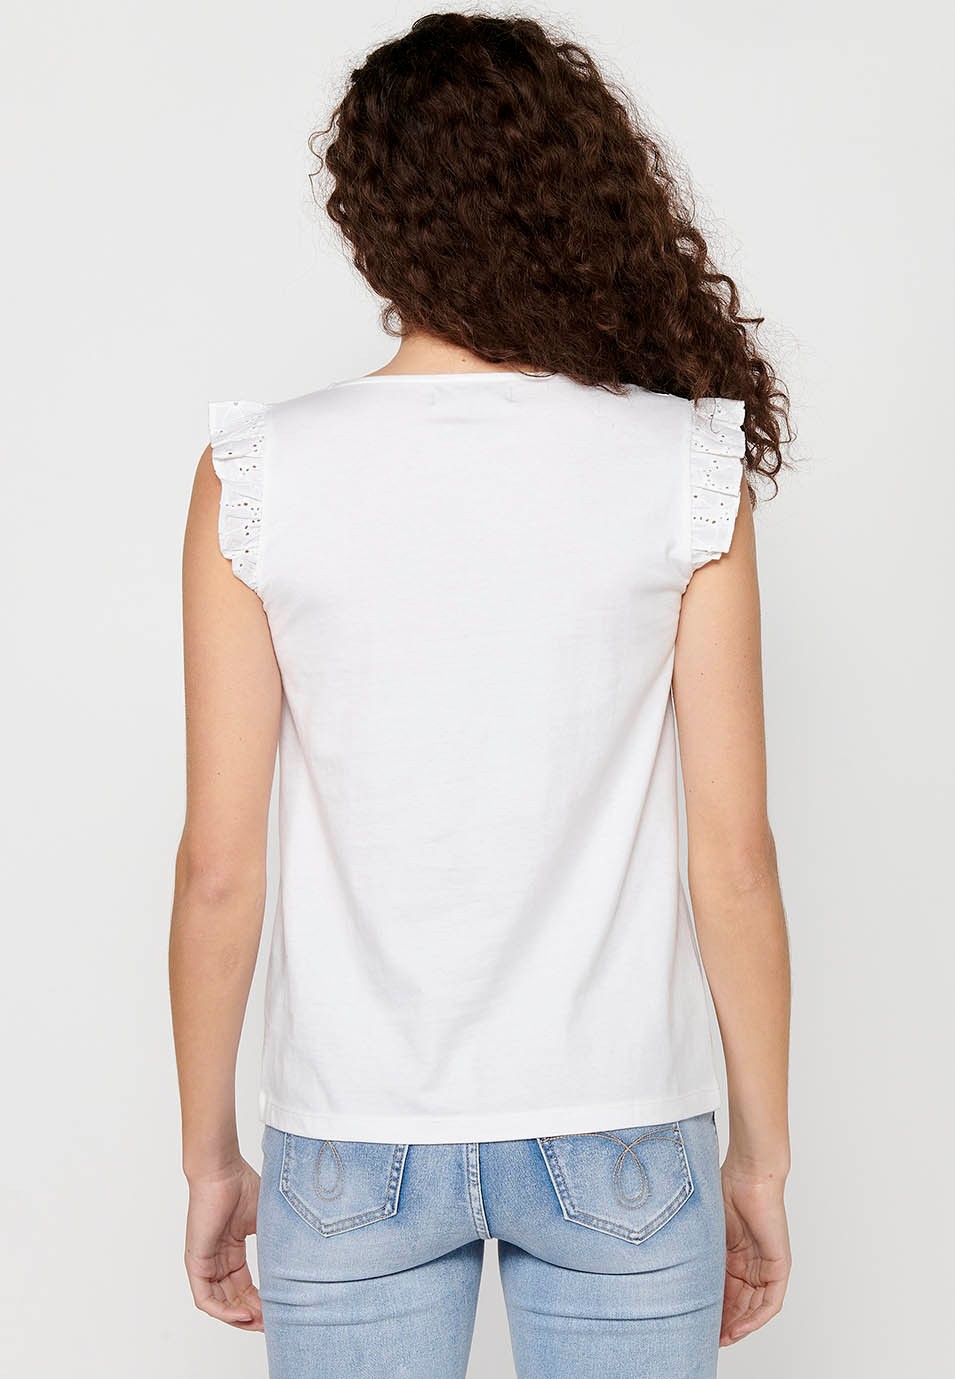 Women's White Round Neck Short Sleeve T-shirt with Ruffle on the Shoulders 3